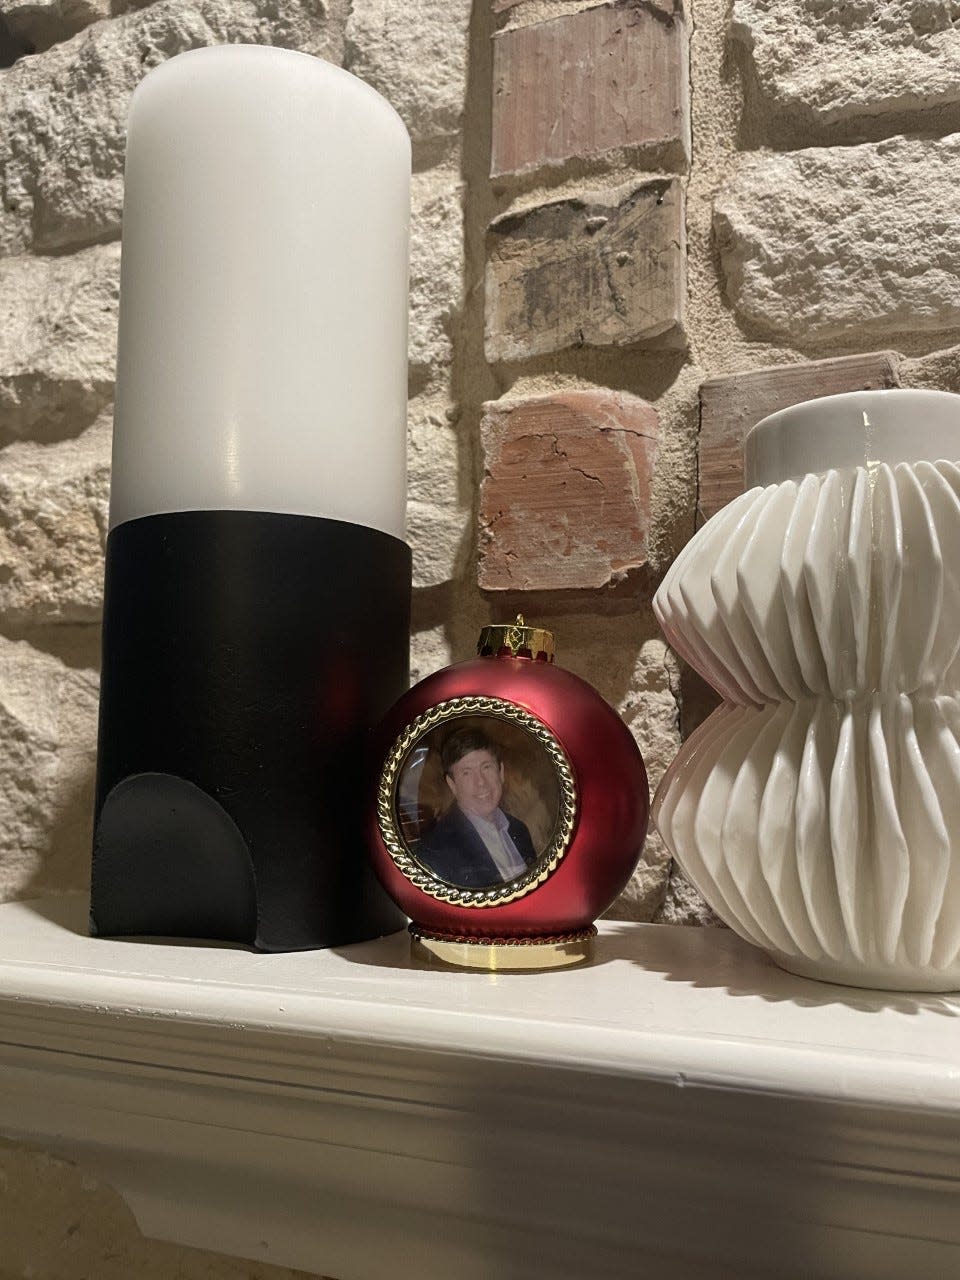 In 2019, Austin-based Keri Thomas was experiencing her first Christmas without her father, Bill Sanford. She learned about Holiday Voices and saved one of her dad's voicemails, along with an image of him, inside a red recordable ornament.